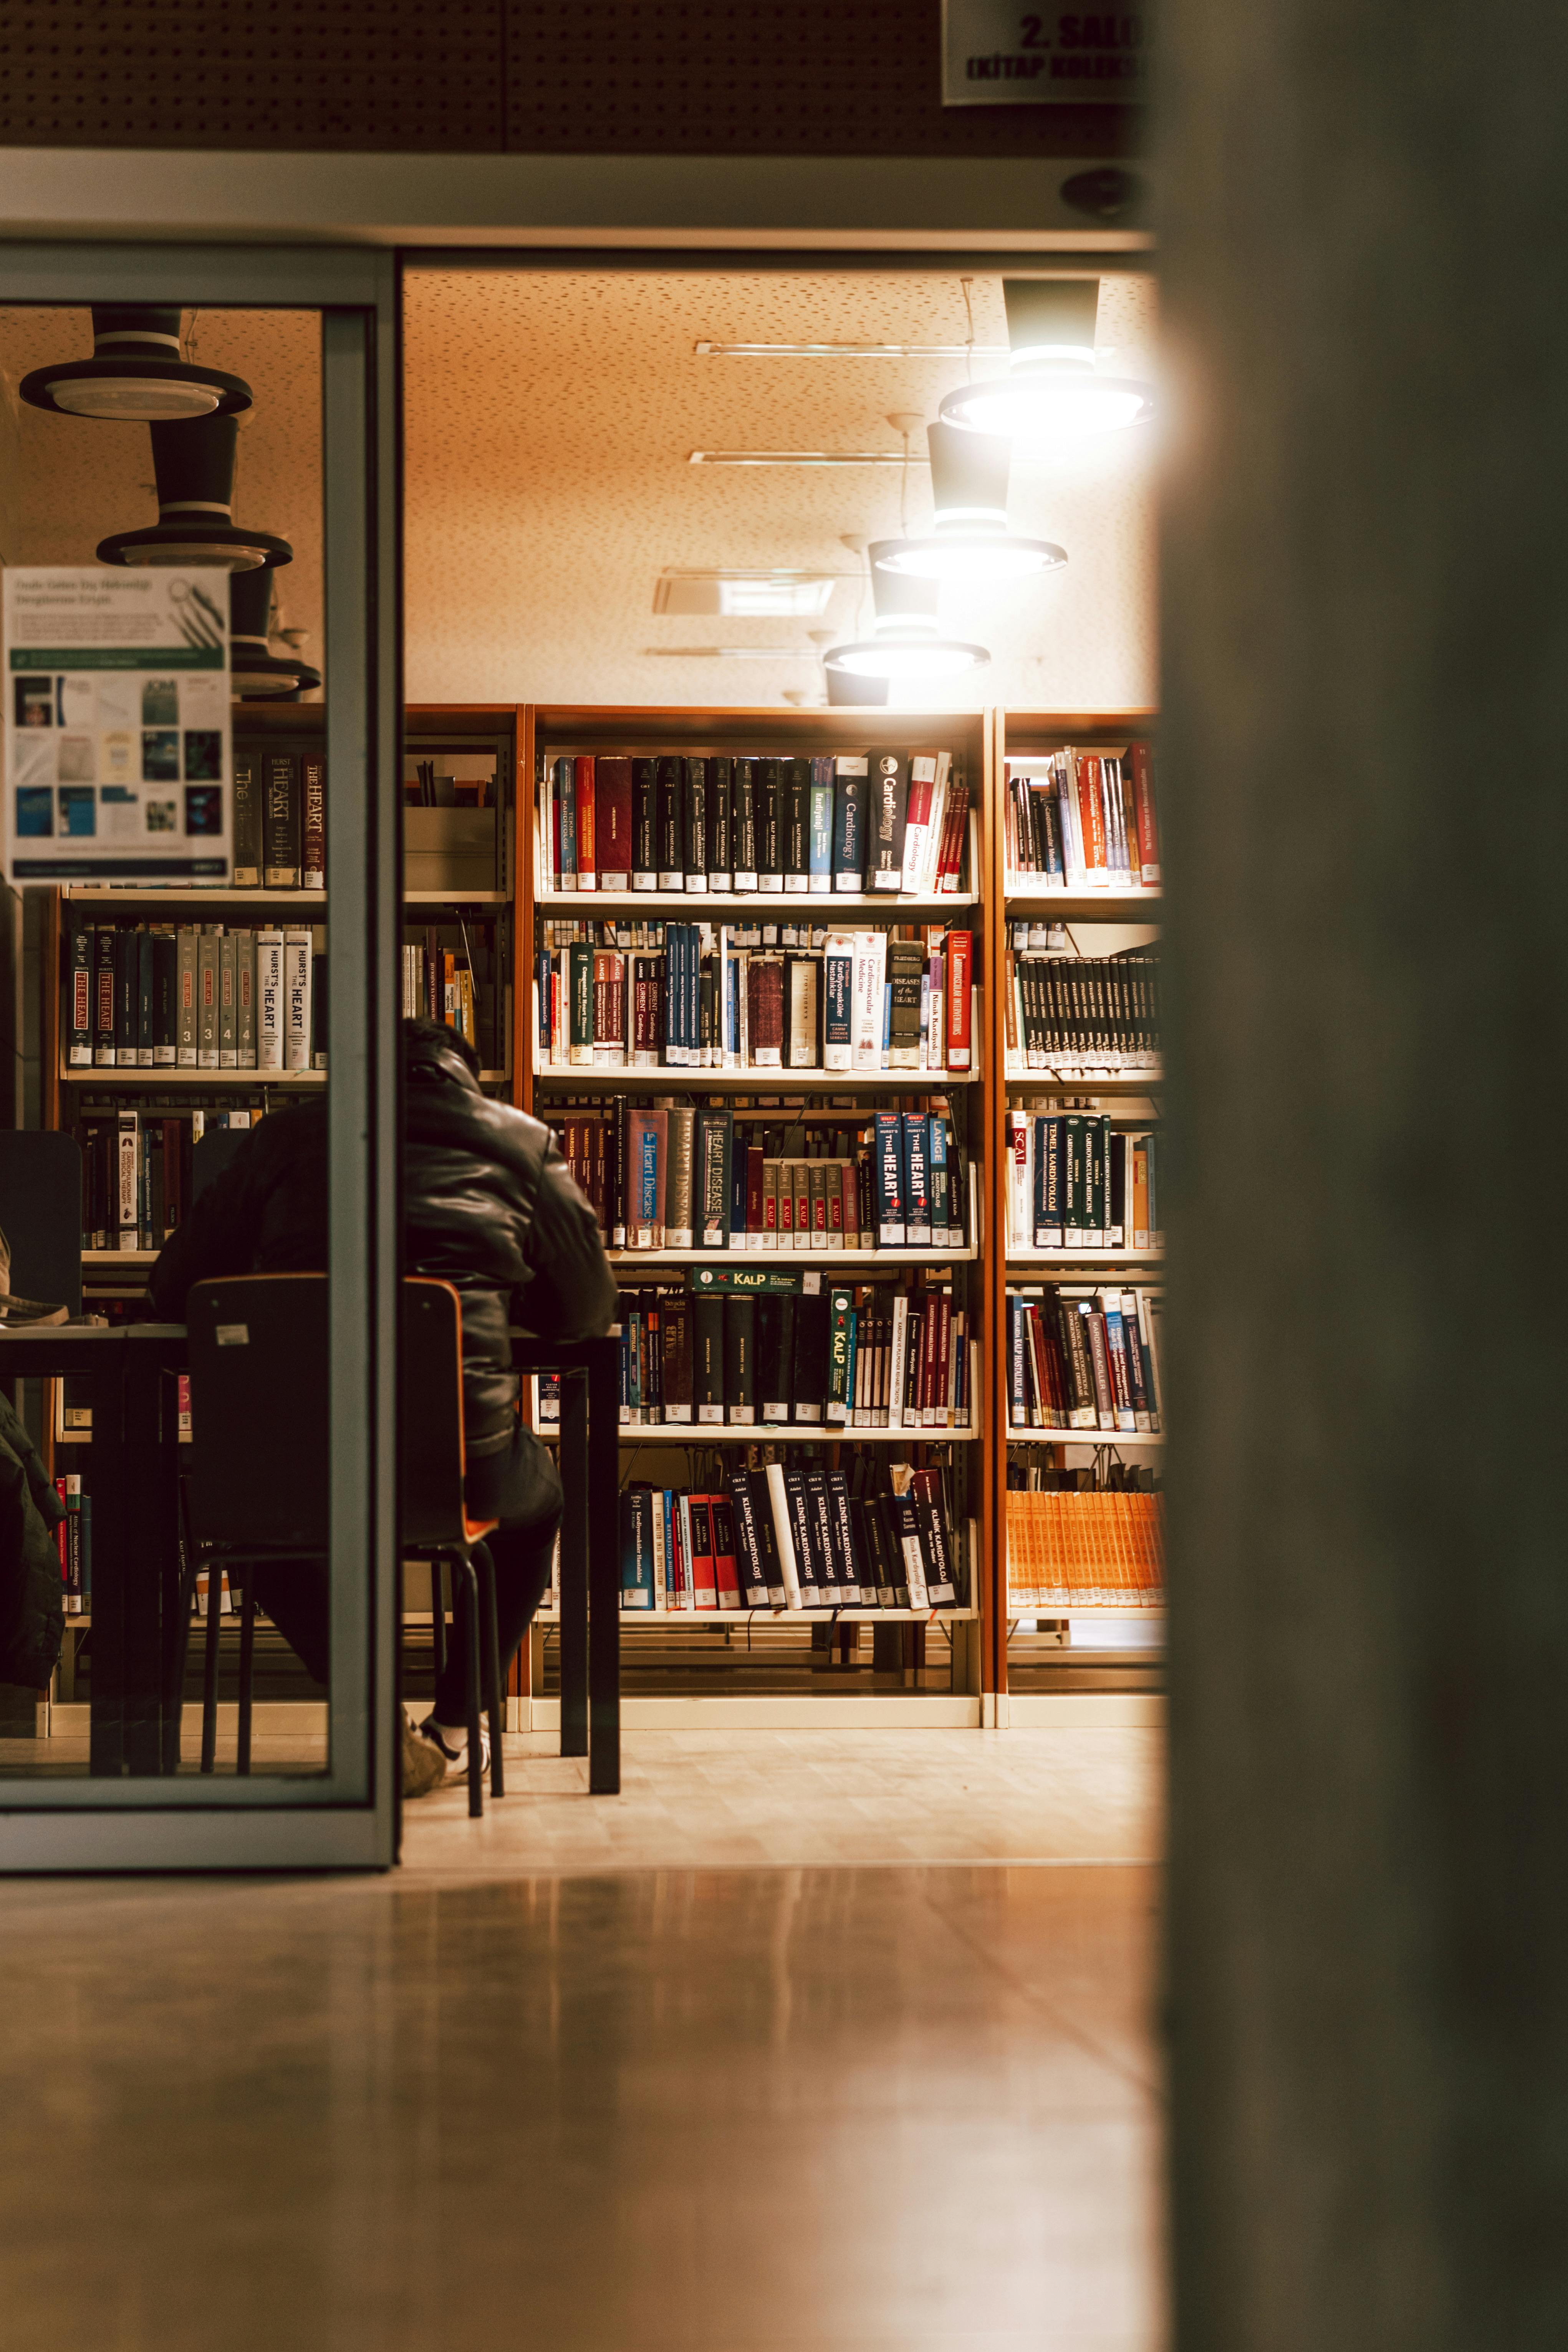 A man sitting in a bookstore | Source: Pexels